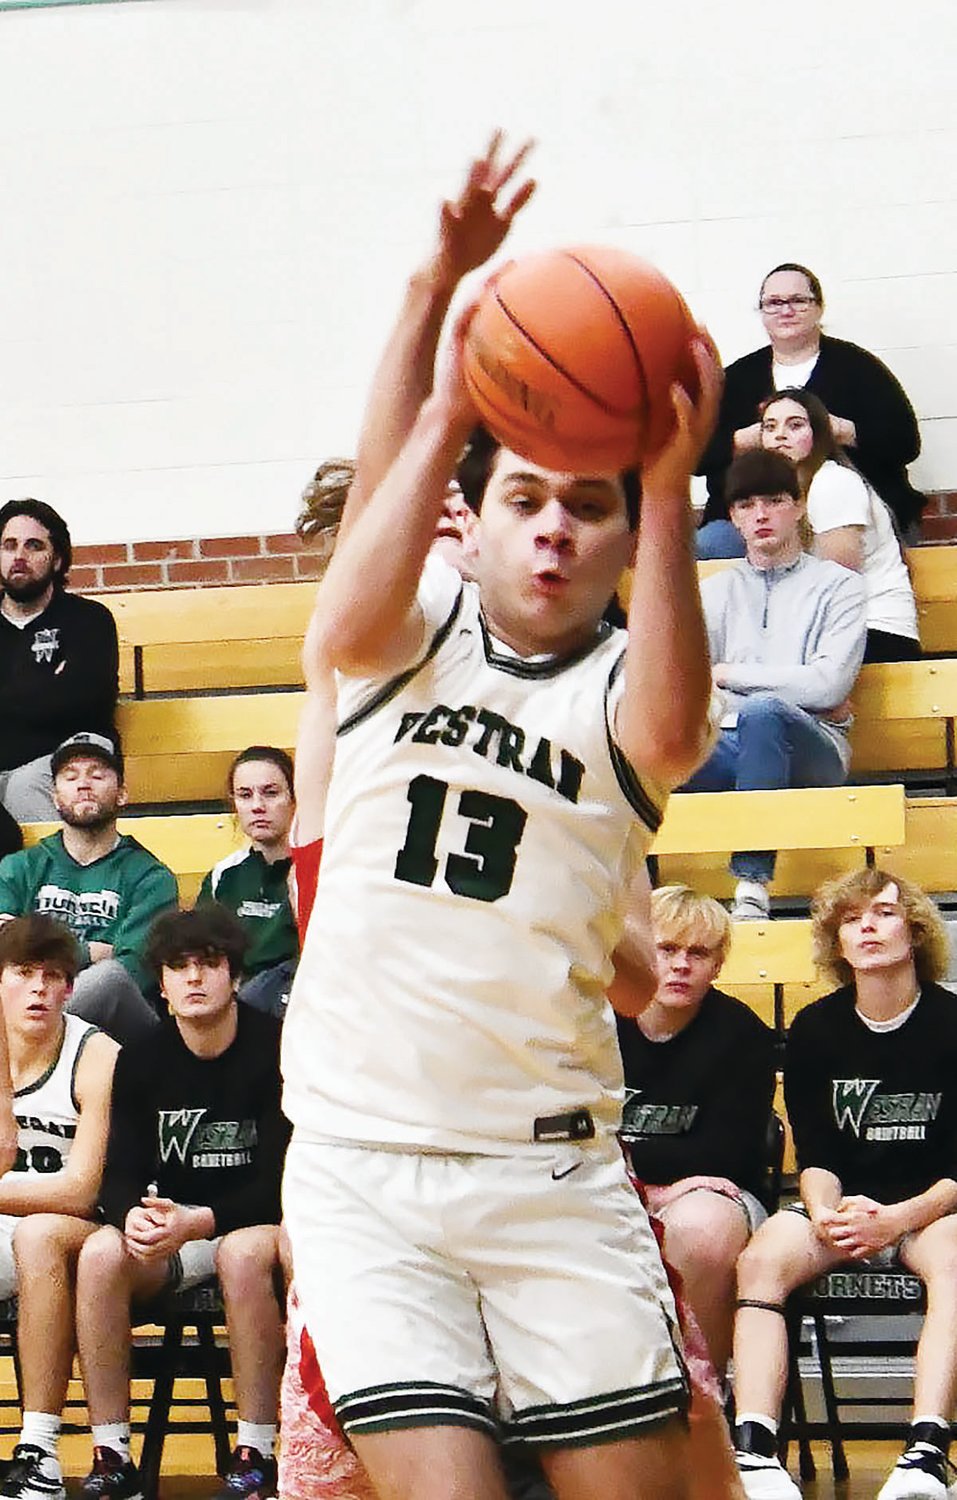 Westran's Jace Chapman makes a facial expression while coming down with a rebound during the second half.